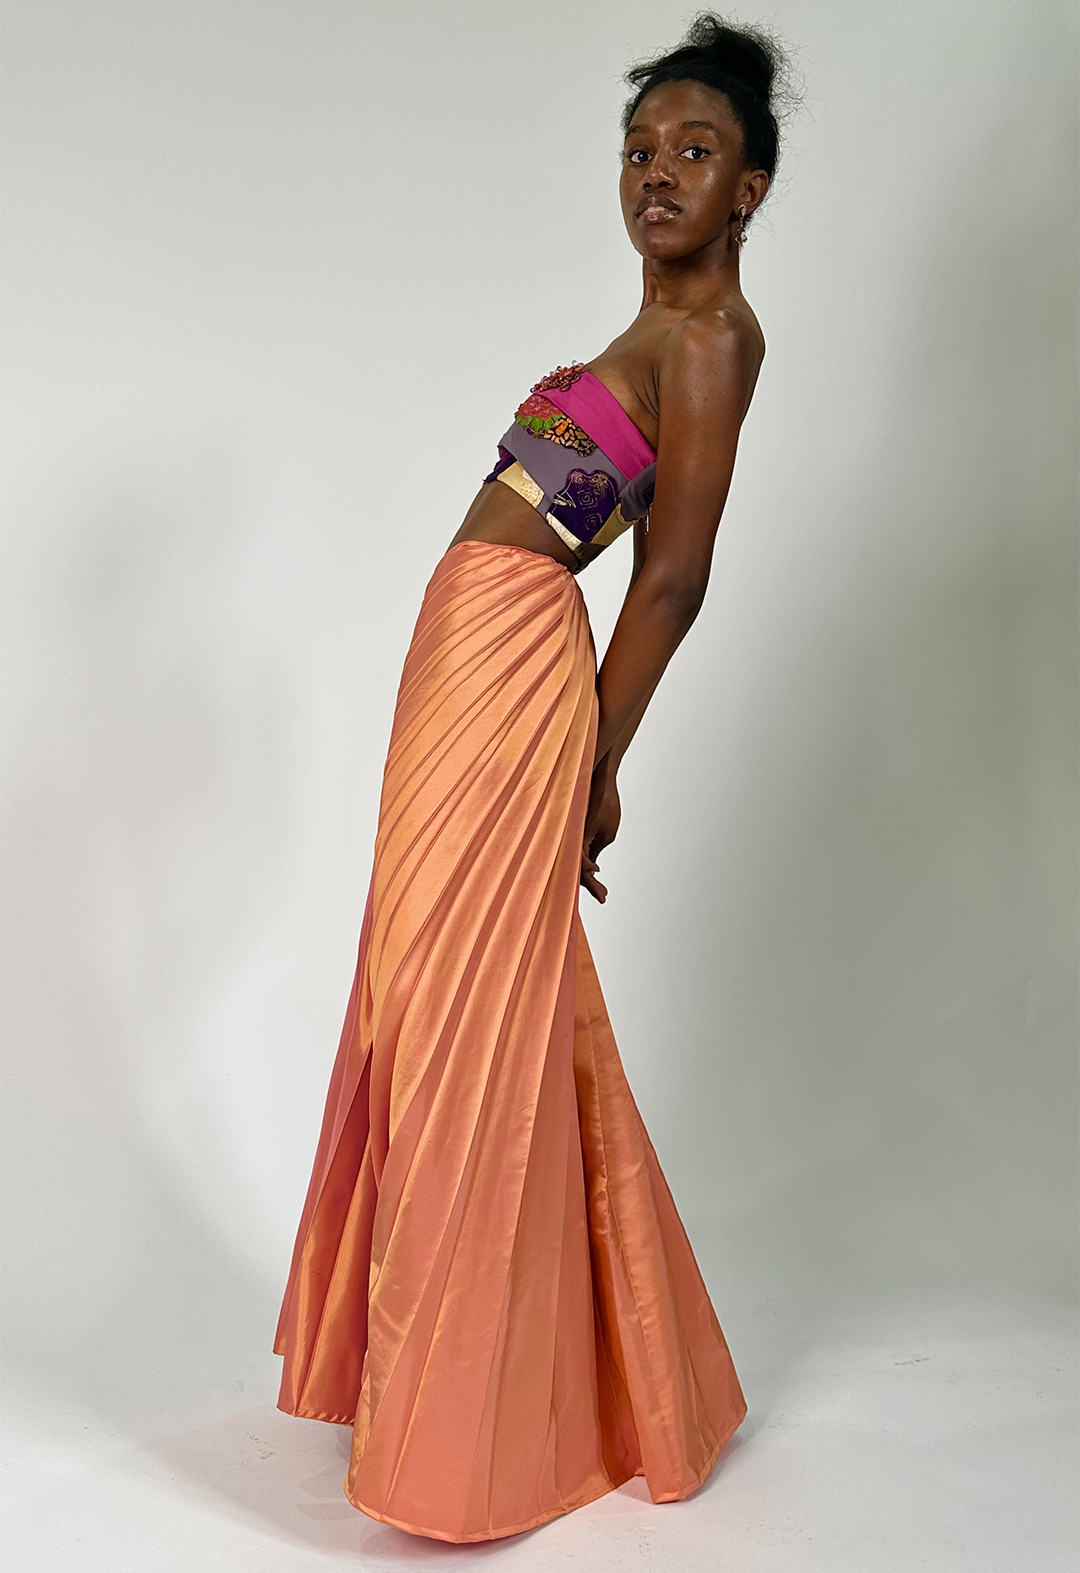 The side sunburst pleats cascade around the hips, fanning out and giving defined line direction, while model stands to the side, slightly leaning back with arms crossed behind their back.